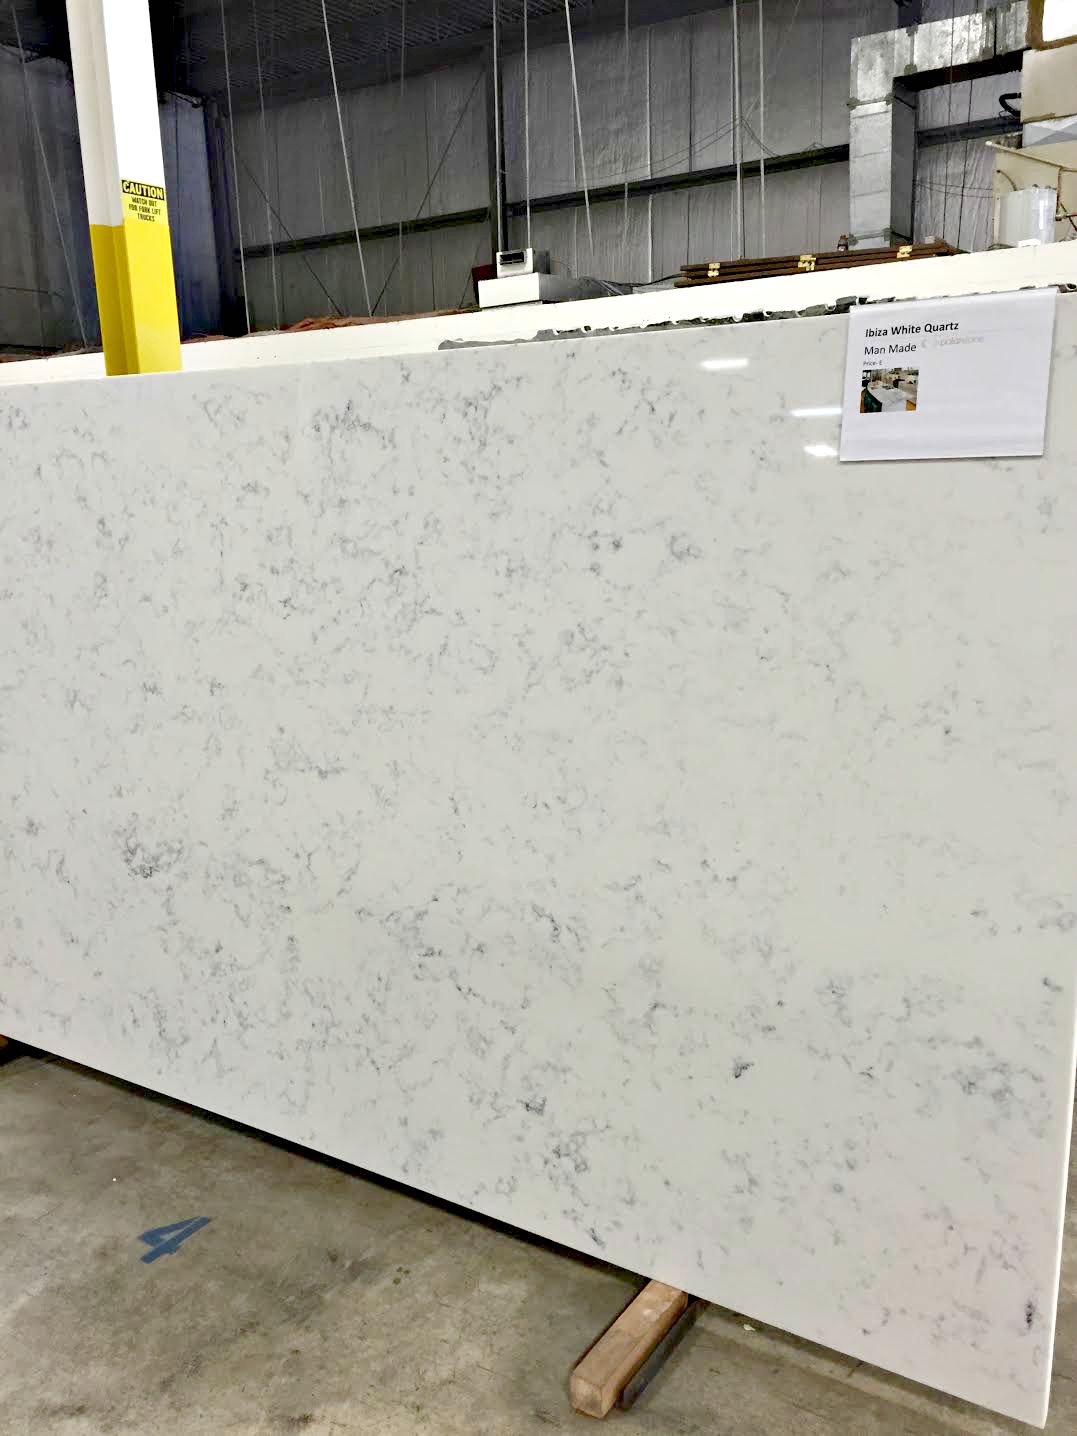 Stone Counters That Look Like Marble (And My Pick!) from Thrifty ... - ibiza white quartz